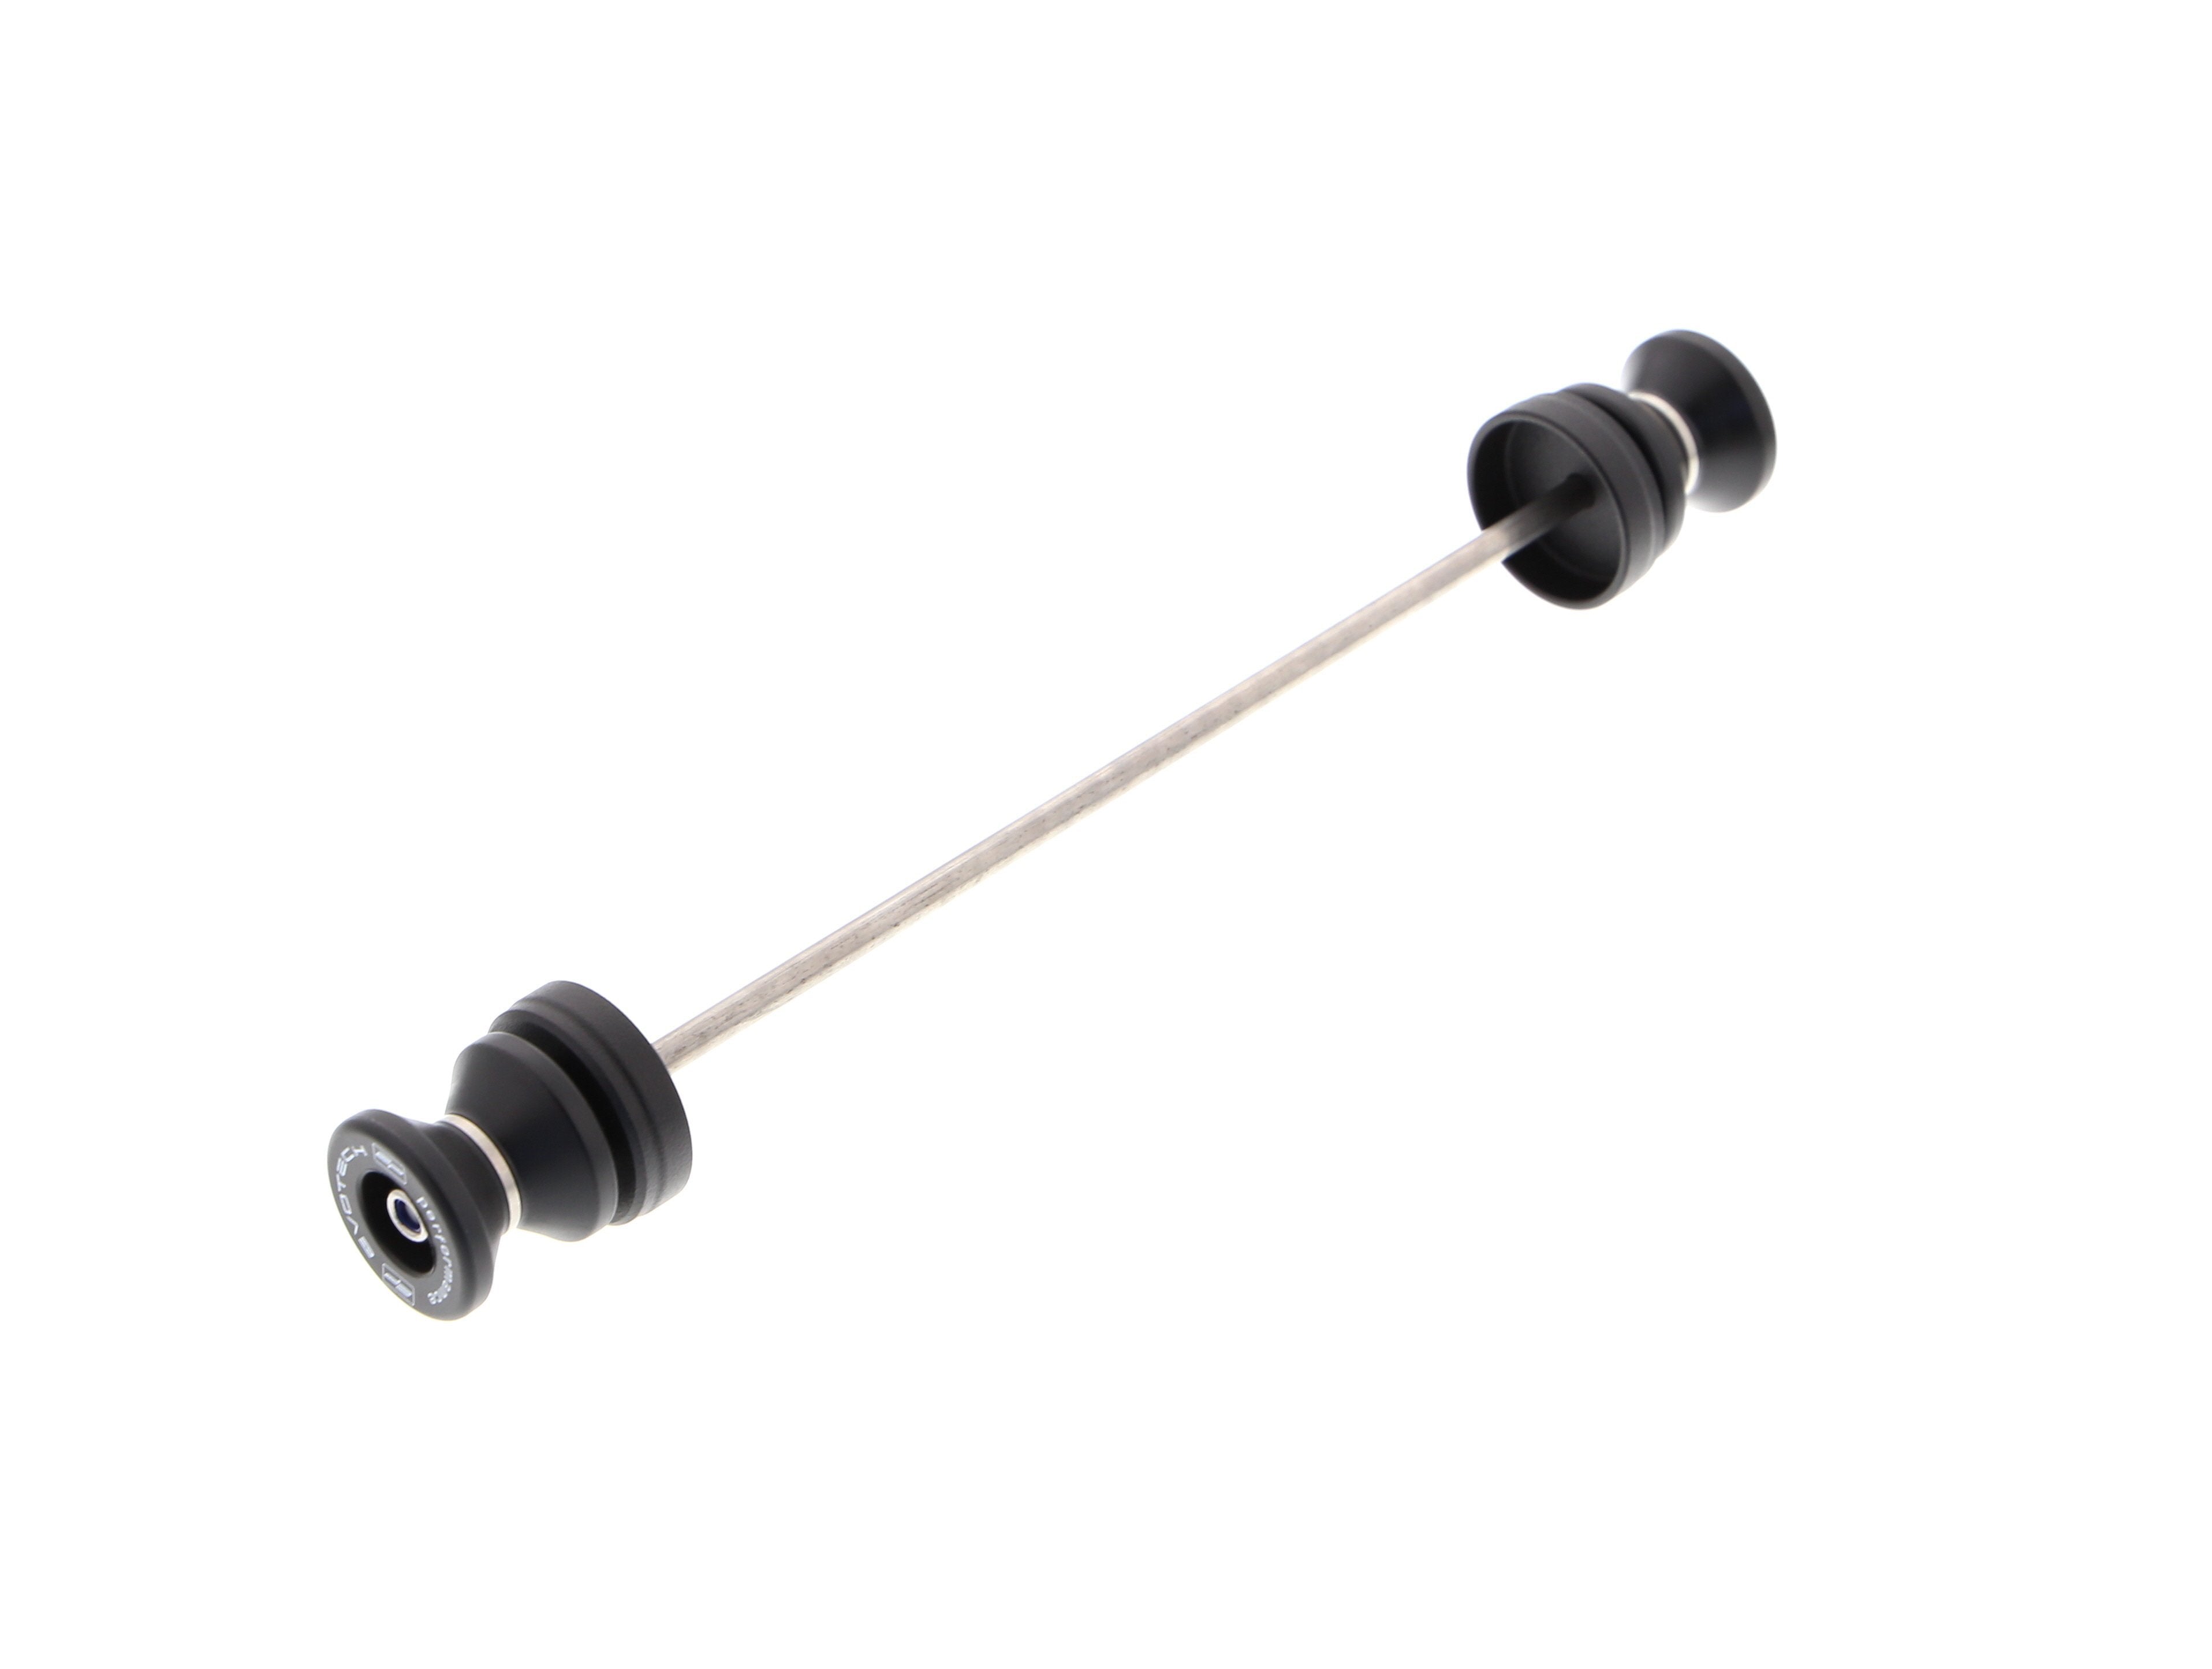 EP Paddock Stand Bobbins for the Ducati Scrambler Classic comprises a spindle rod with EPâs signature nylon paddock stand bobbins either end with precision shaped aluminium spacer.